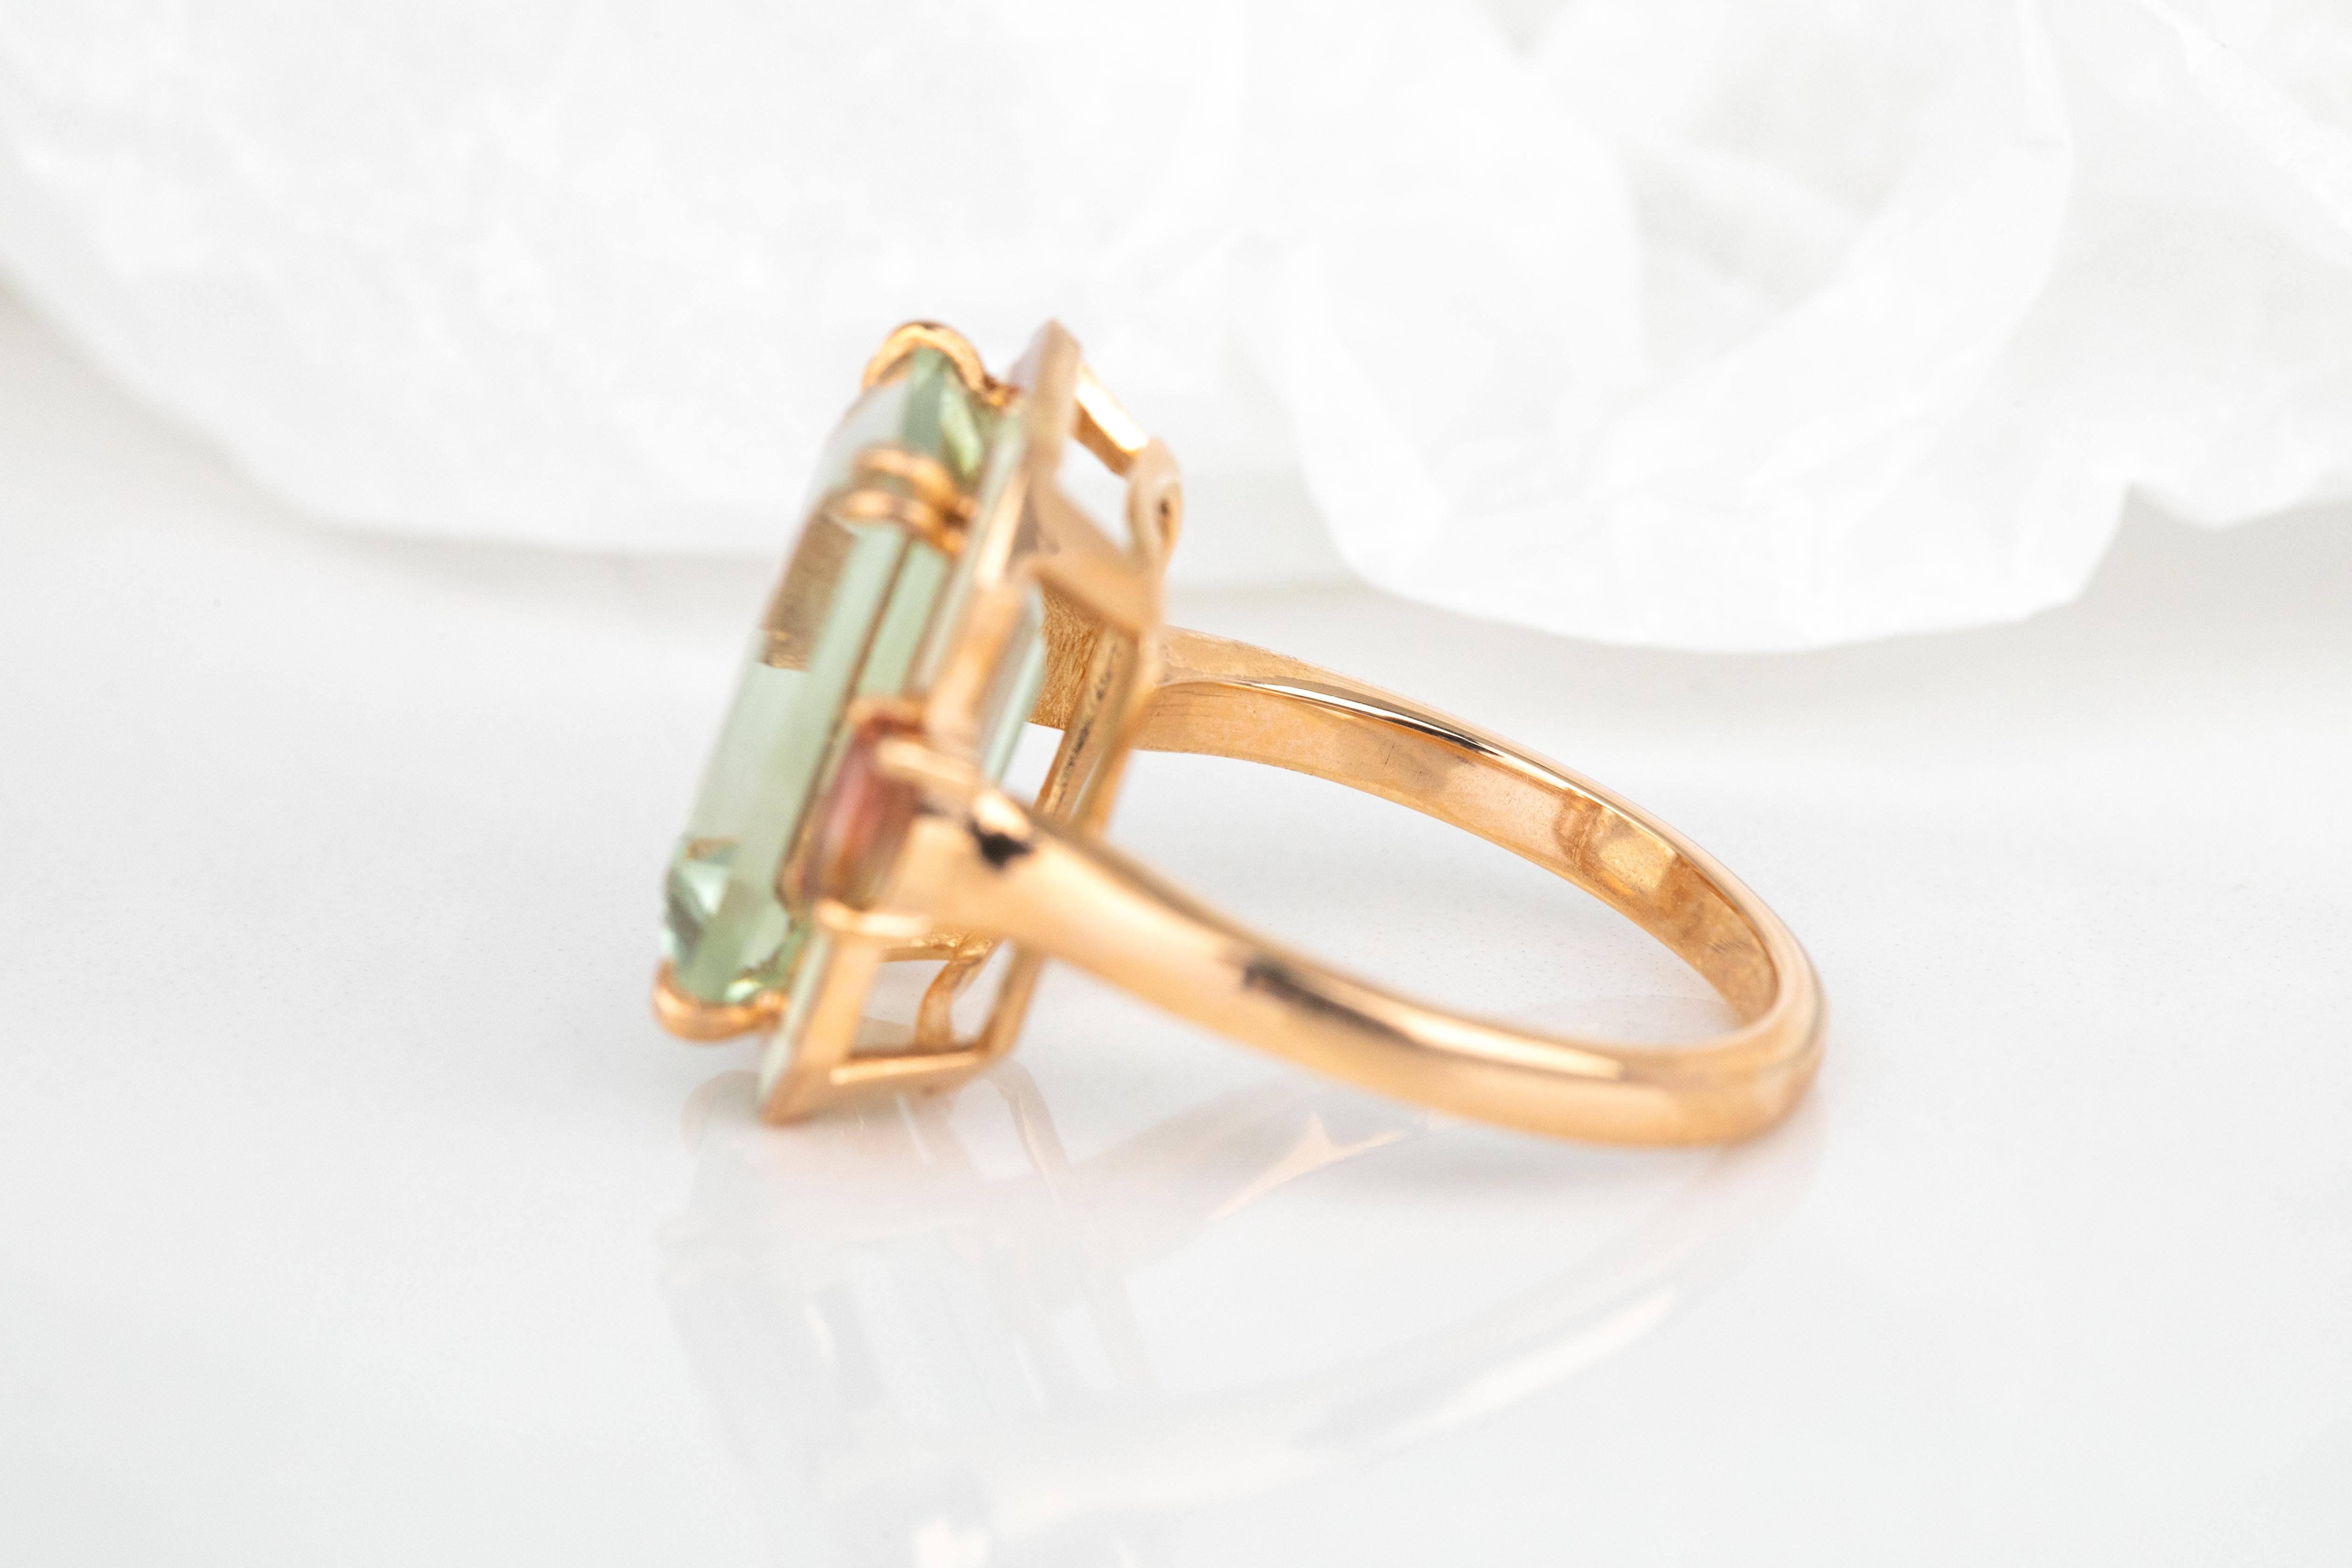 For Sale:  Artdeco Style Ring, 14k Solid Gold, Green Amethyst and Pink Tourmaline Stone Ring 5